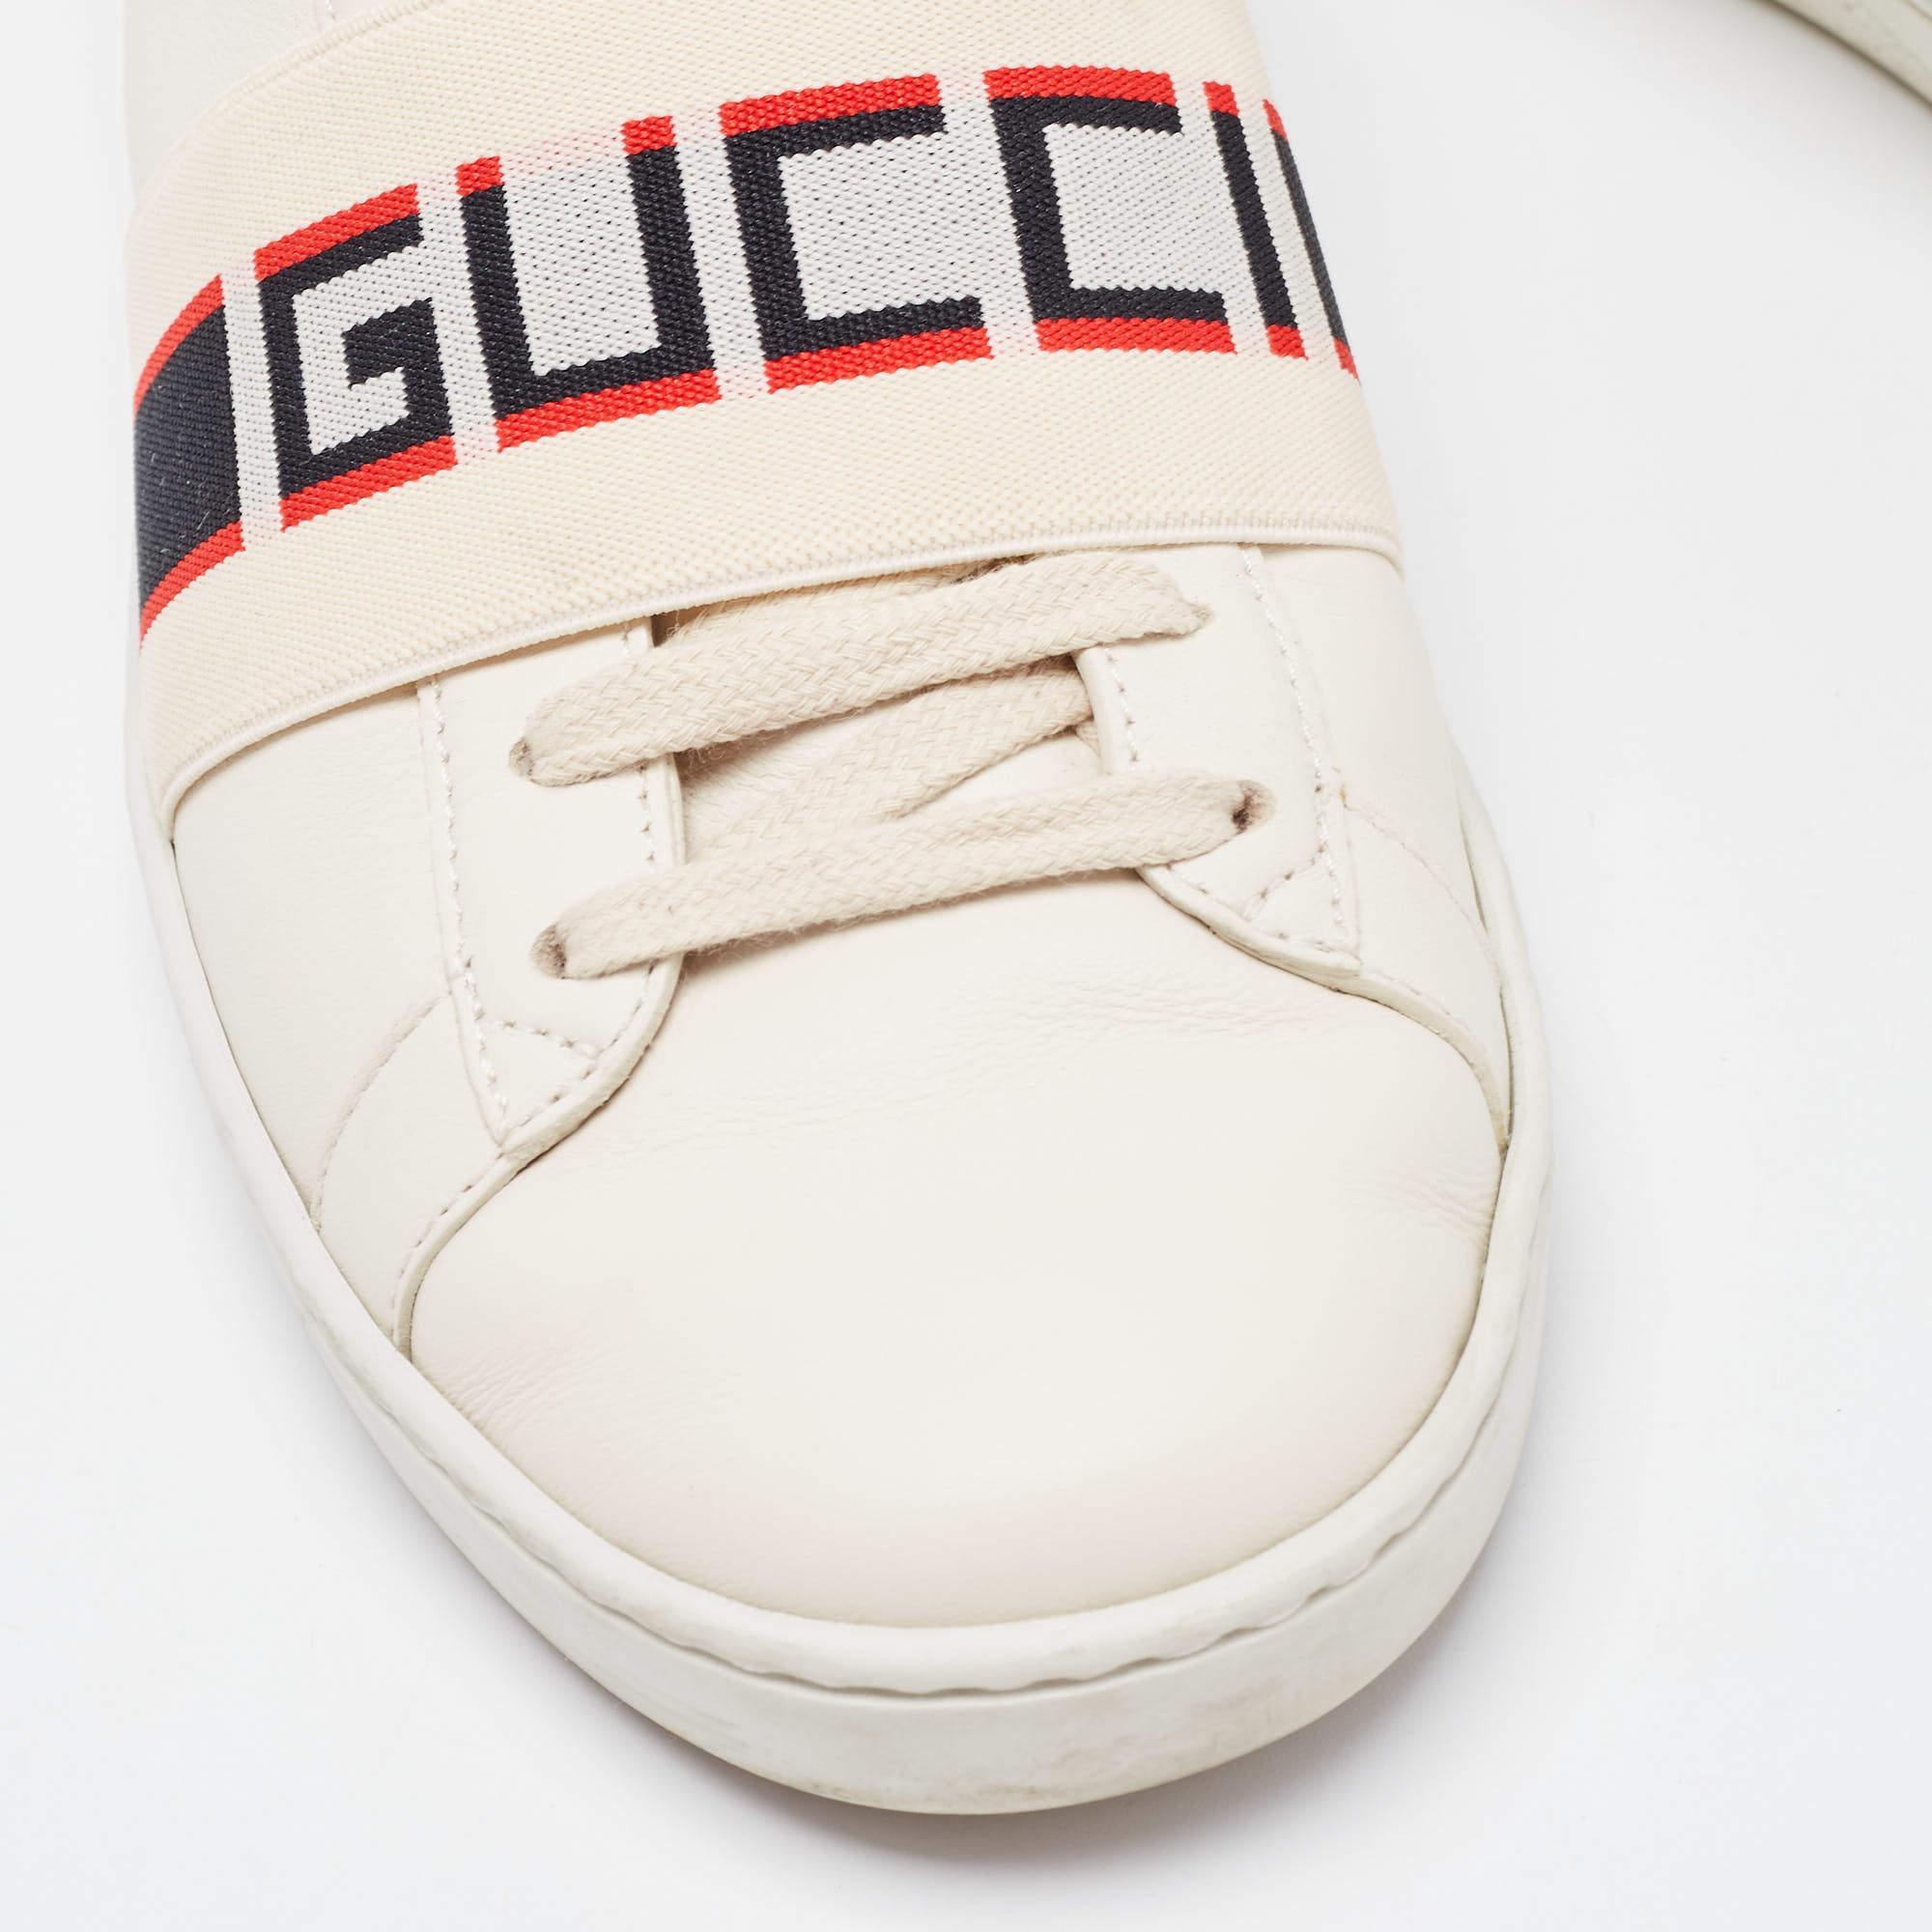 Gucci Cream/Red Leather Ace Gucci Band Low Top Sneakers Size 37 1